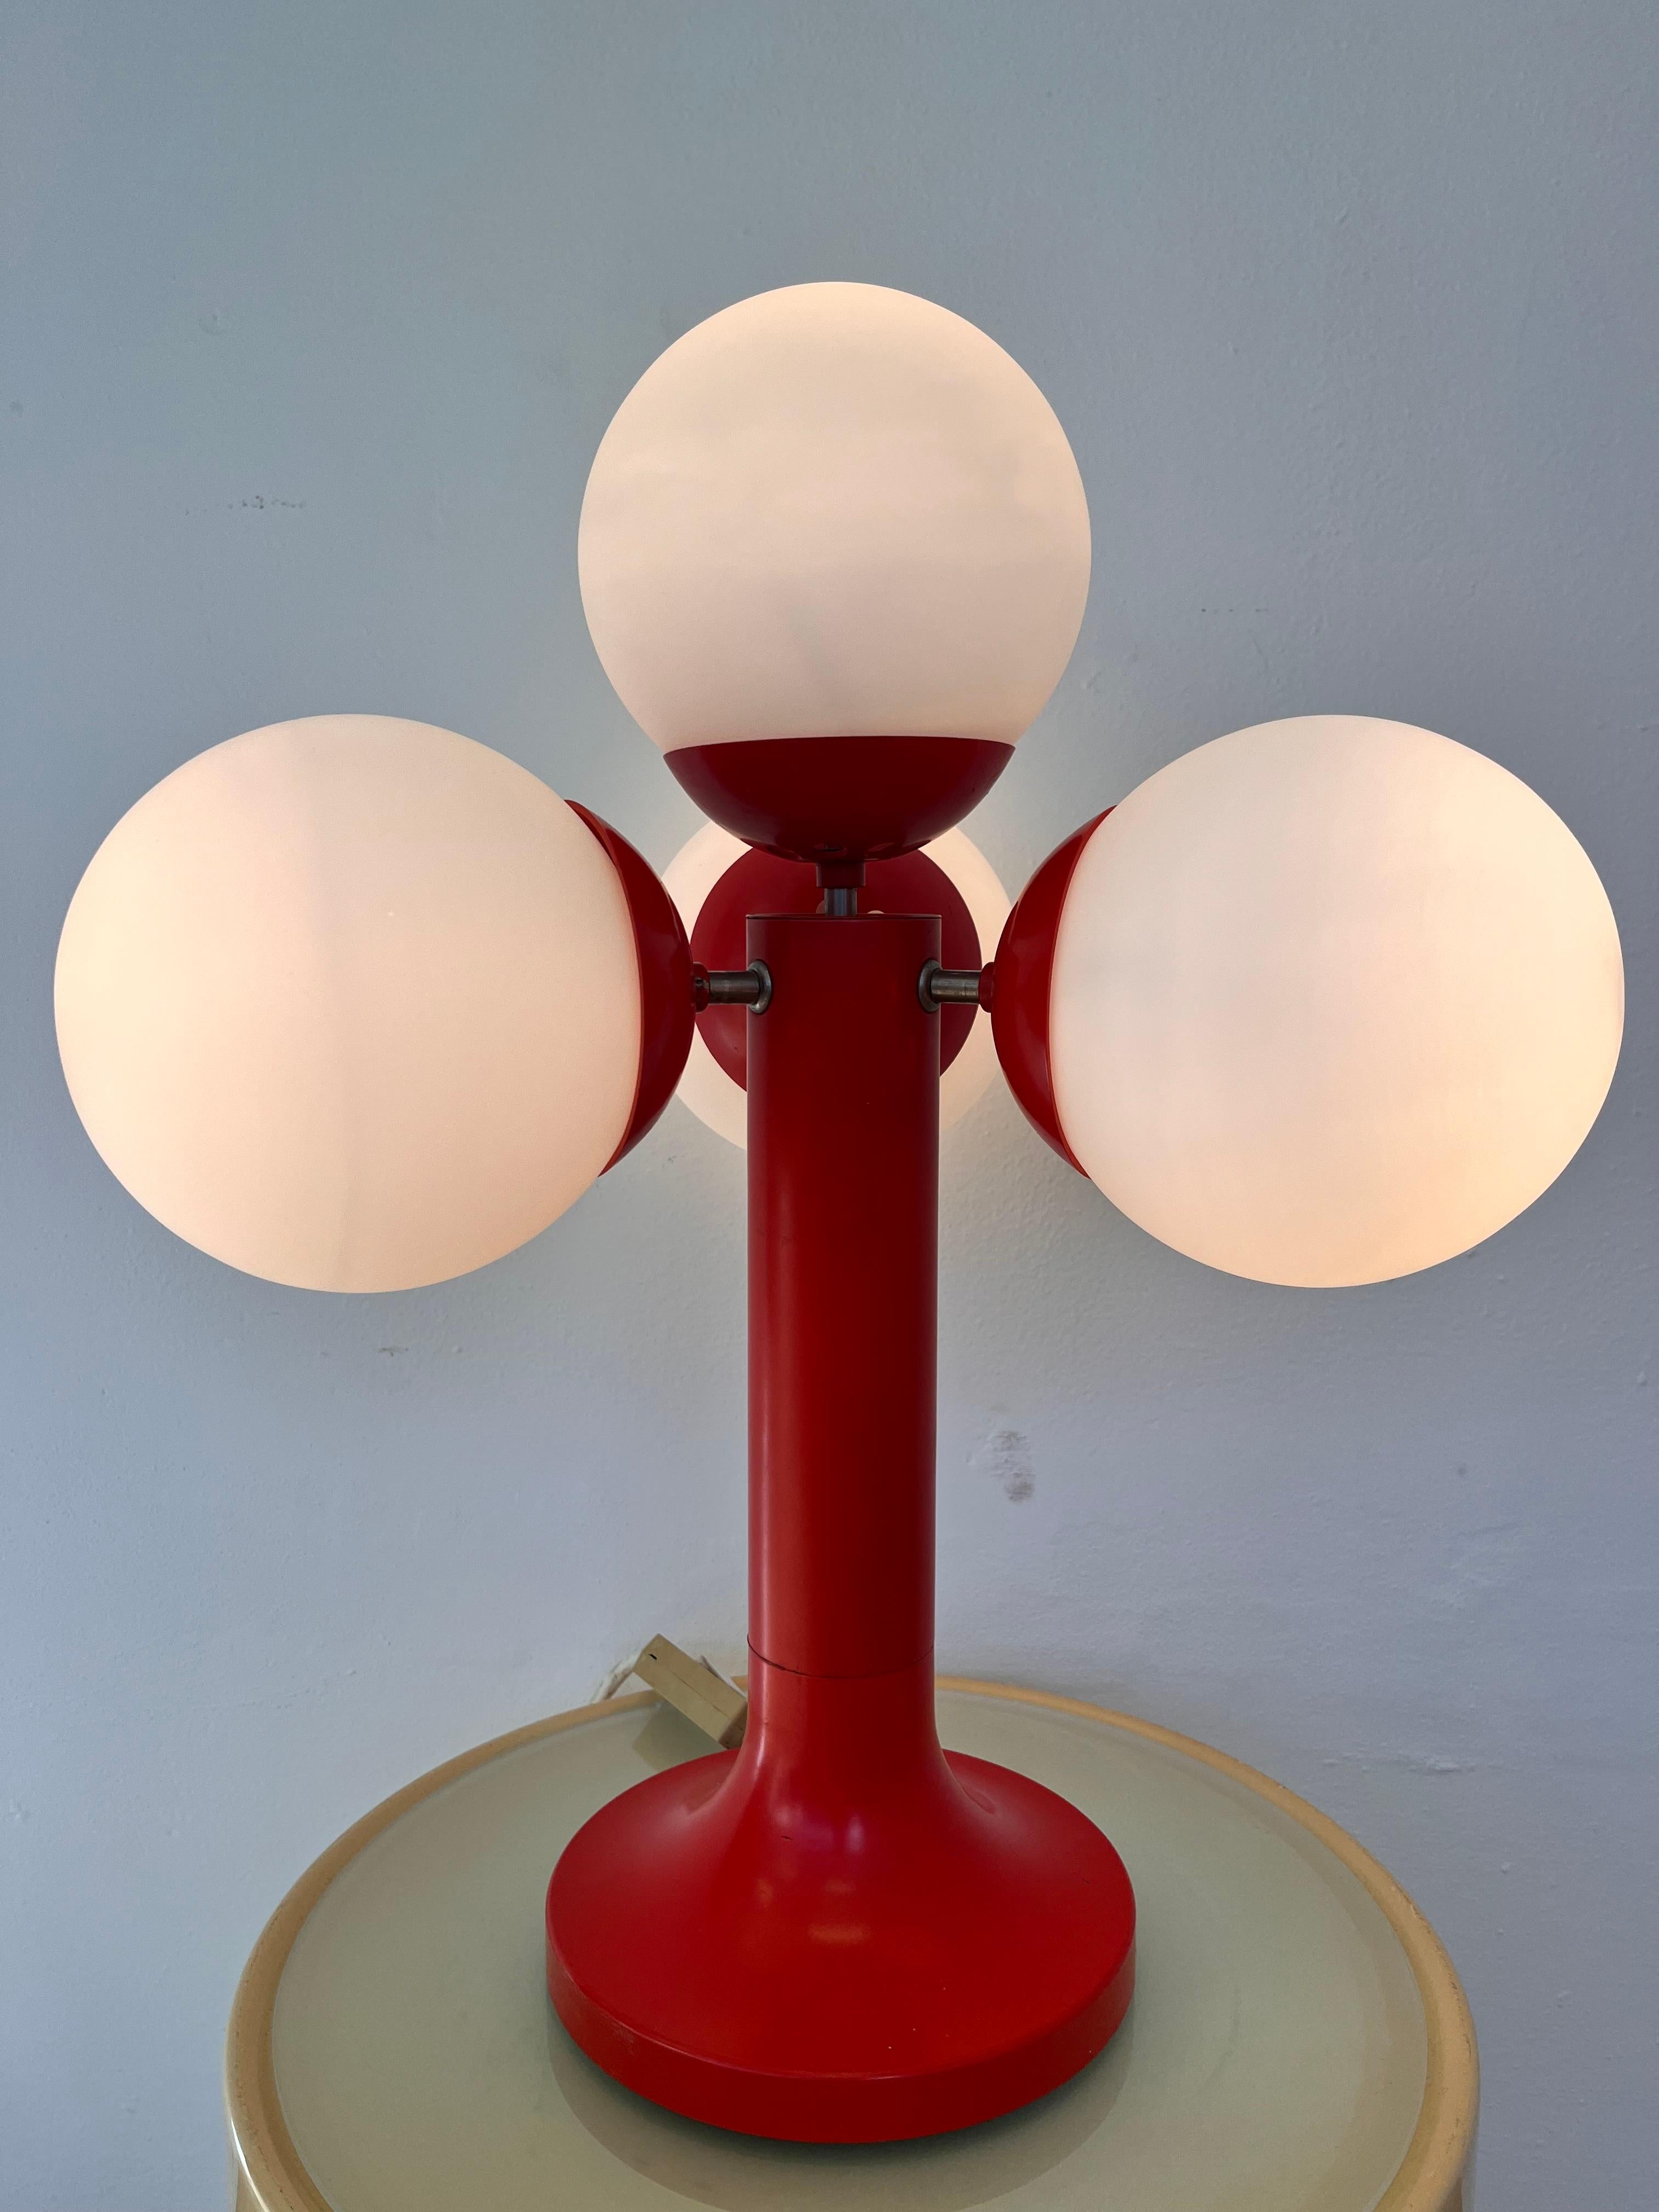 XL Midcentury Space Age Table Lamp, Sputnik or Atom, 1970s - Germany In Good Condition For Sale In Praha, CZ